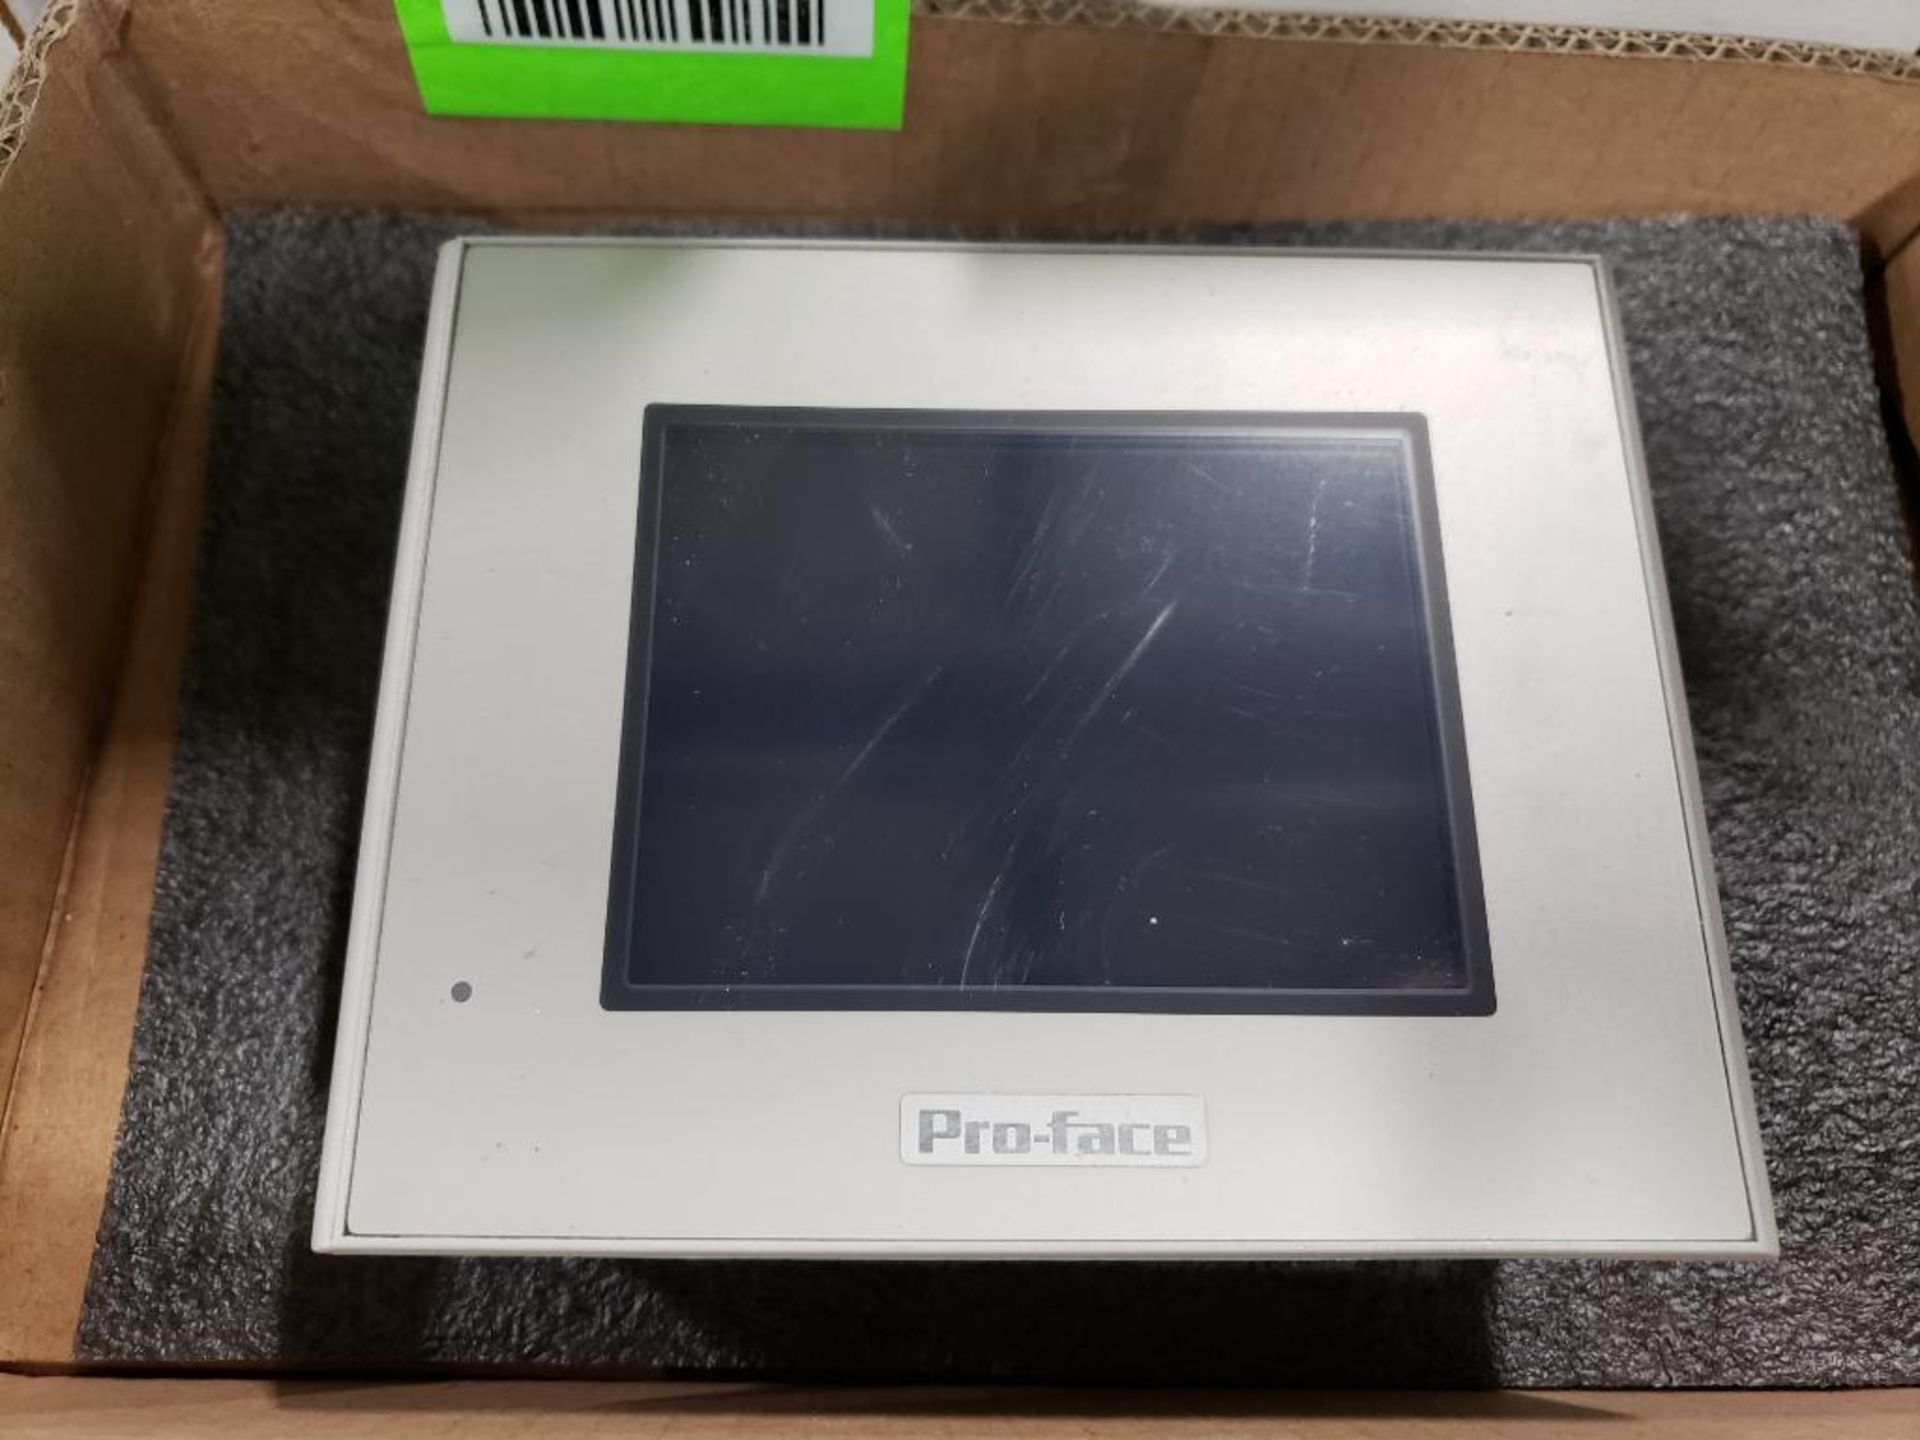 Pro-Face AGP3200-T1-D24 touch screen user interface. - Image 2 of 4